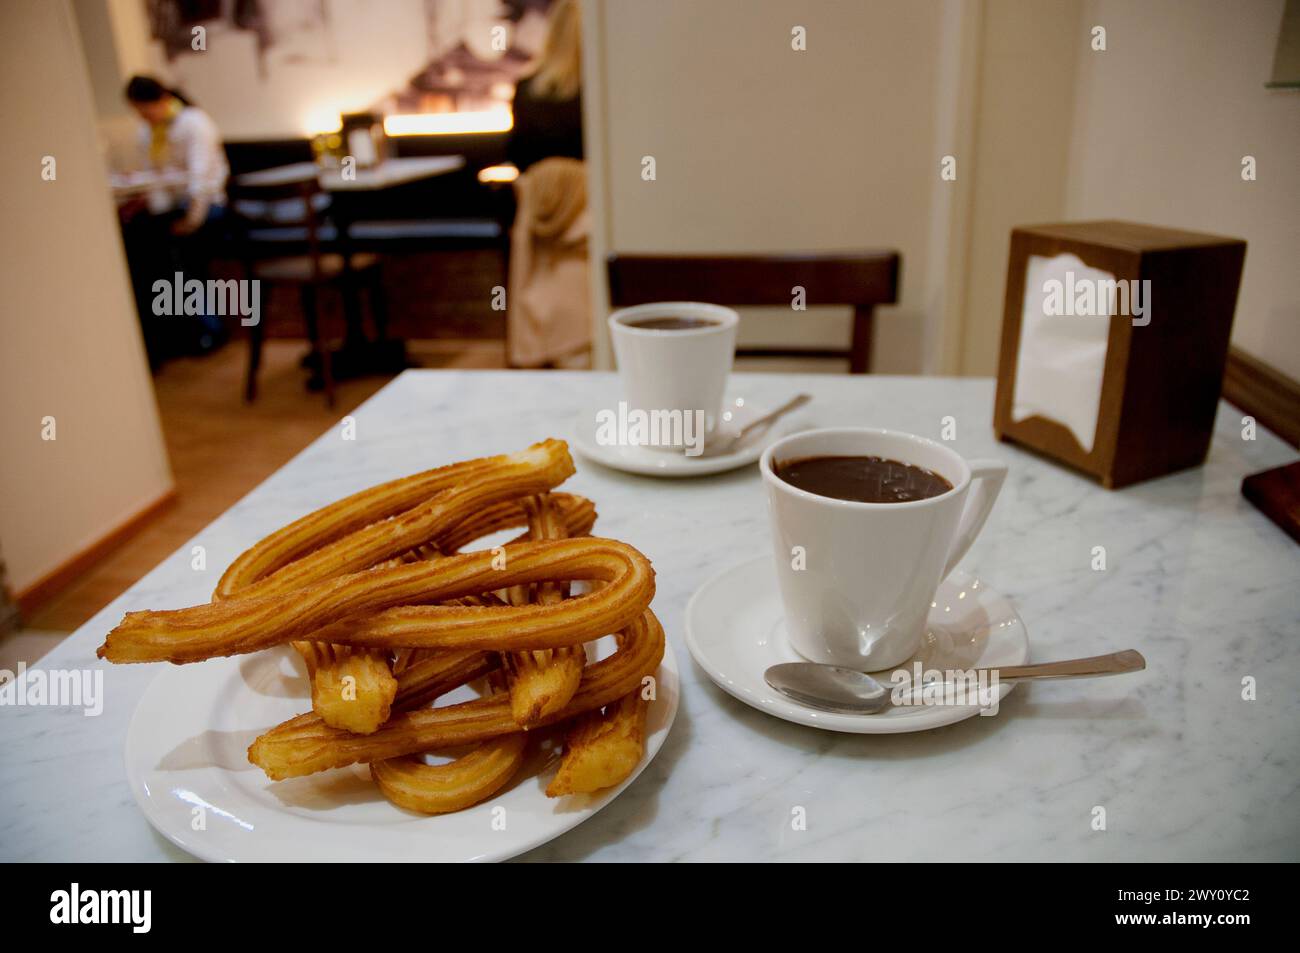 Chocolate with churros for two. Madrid, Spain. Stock Photo